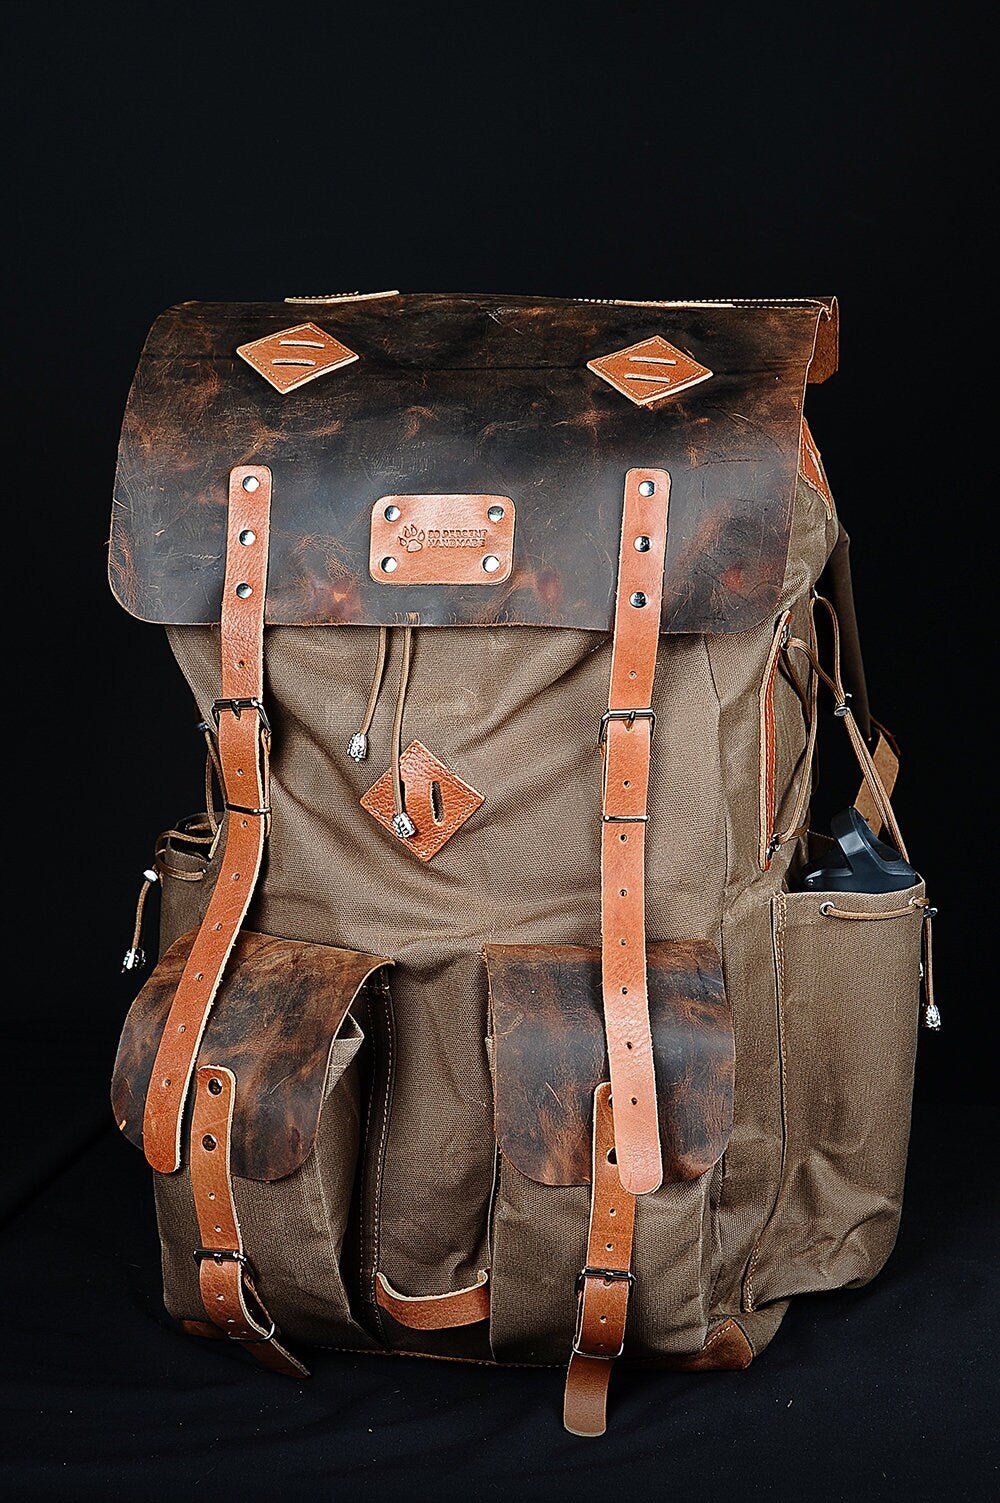 Limited | Bushcraft Backpack | Camping Backpack | Waxed Canvas with Leather Details Backpack for Travel, Camping | 70 L | Personalization  99percenthandmade   